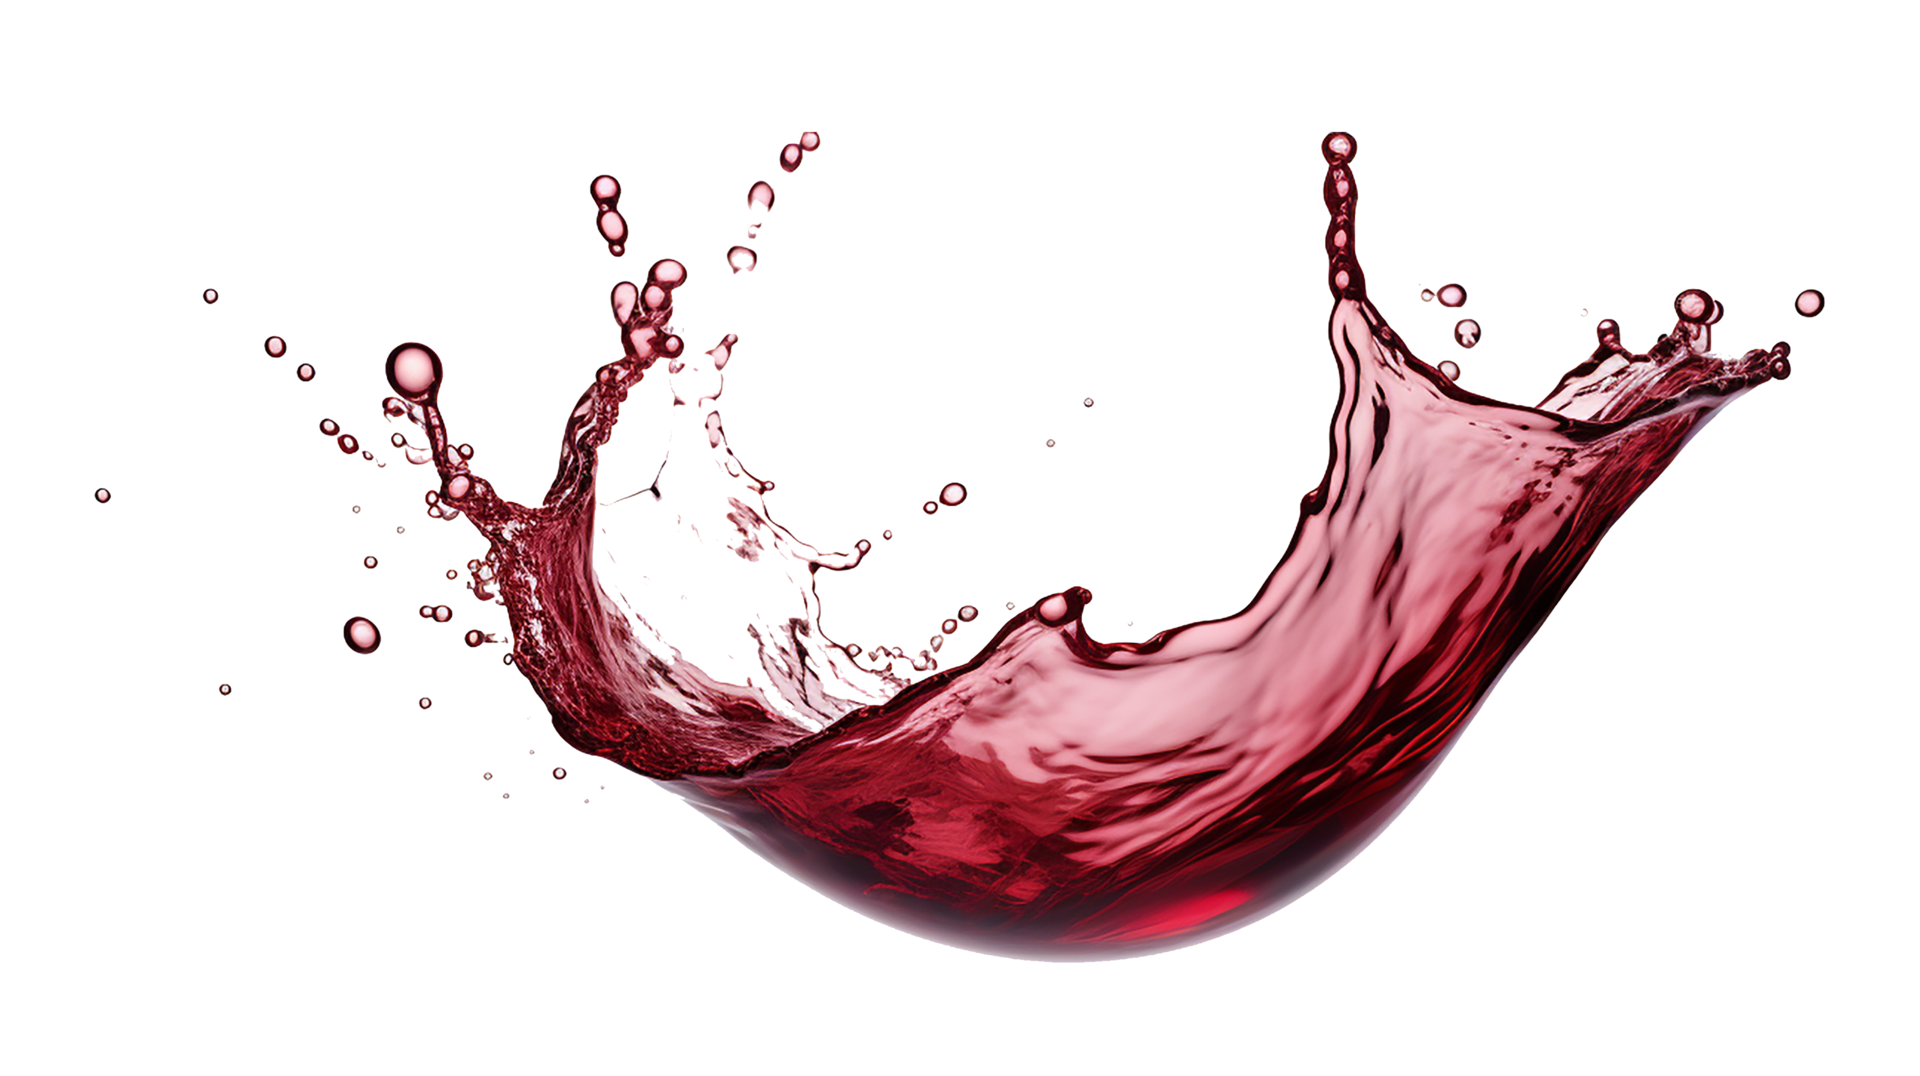 Red Water Wine Splash Liquid Wave With Splatter Isolated On White